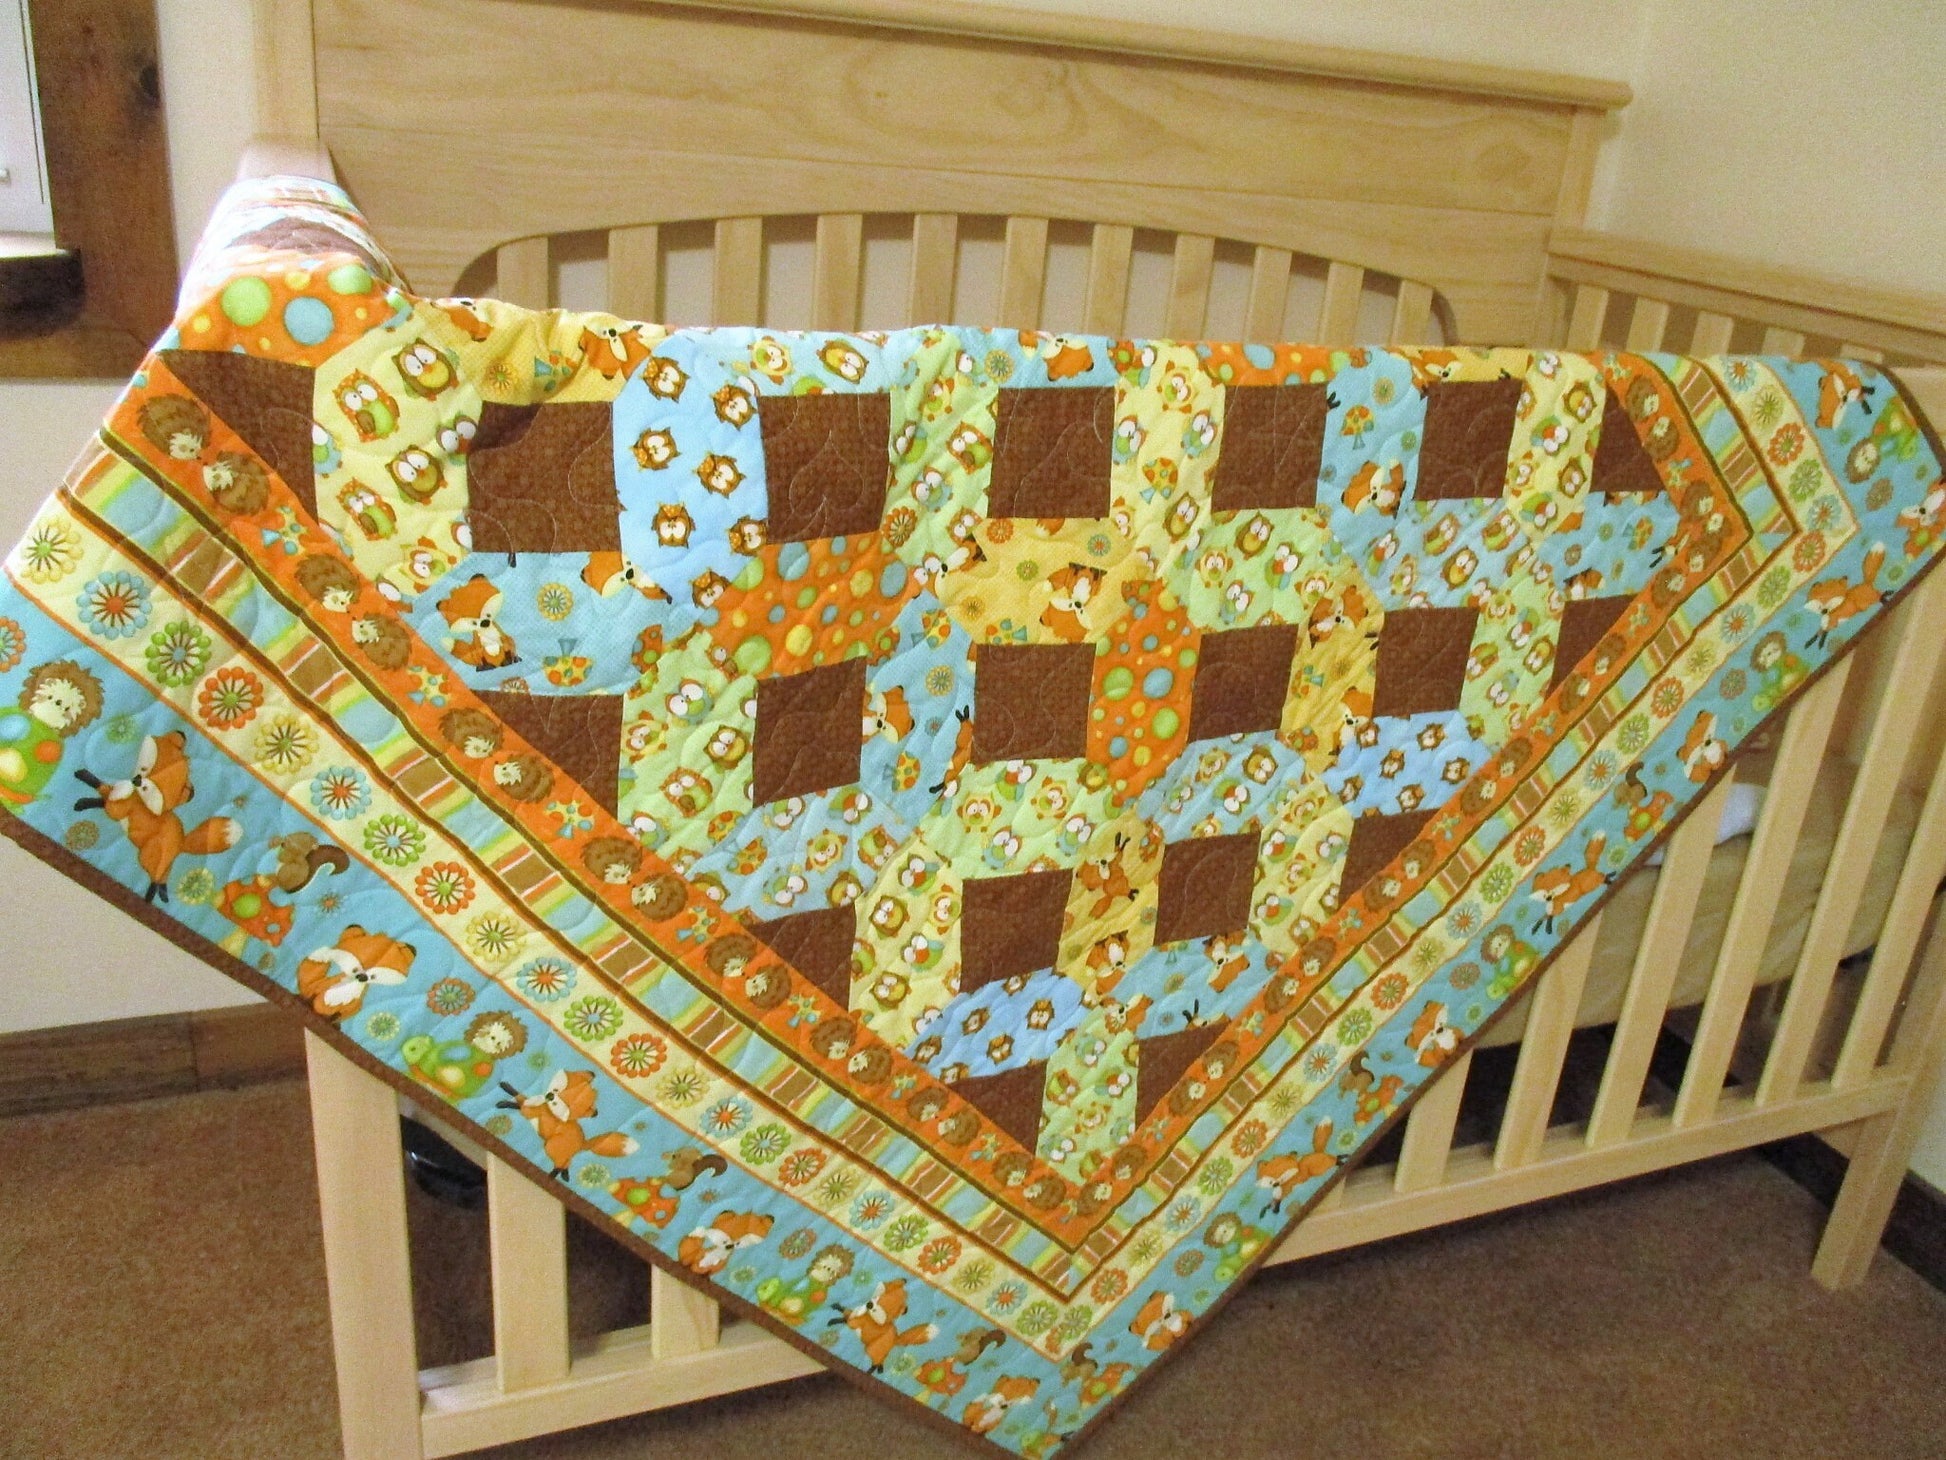 Woodland Animal Baby Quilt, Fall Baby Shower Gift, Cotton Patchwork Crib Blanket